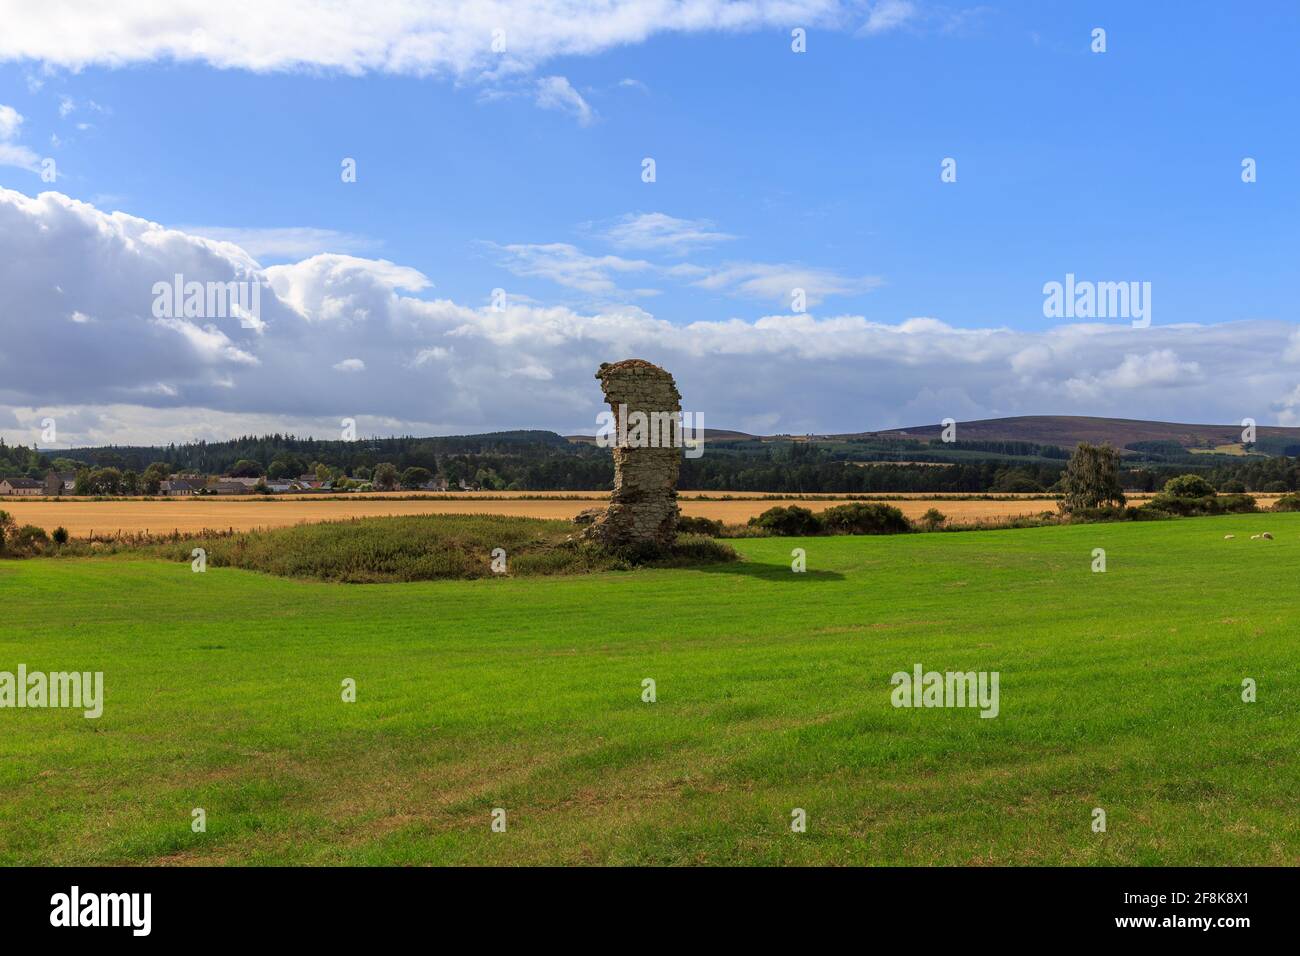 Open Scottish fields with remains of an old stone building standing amond them. Stock Photo